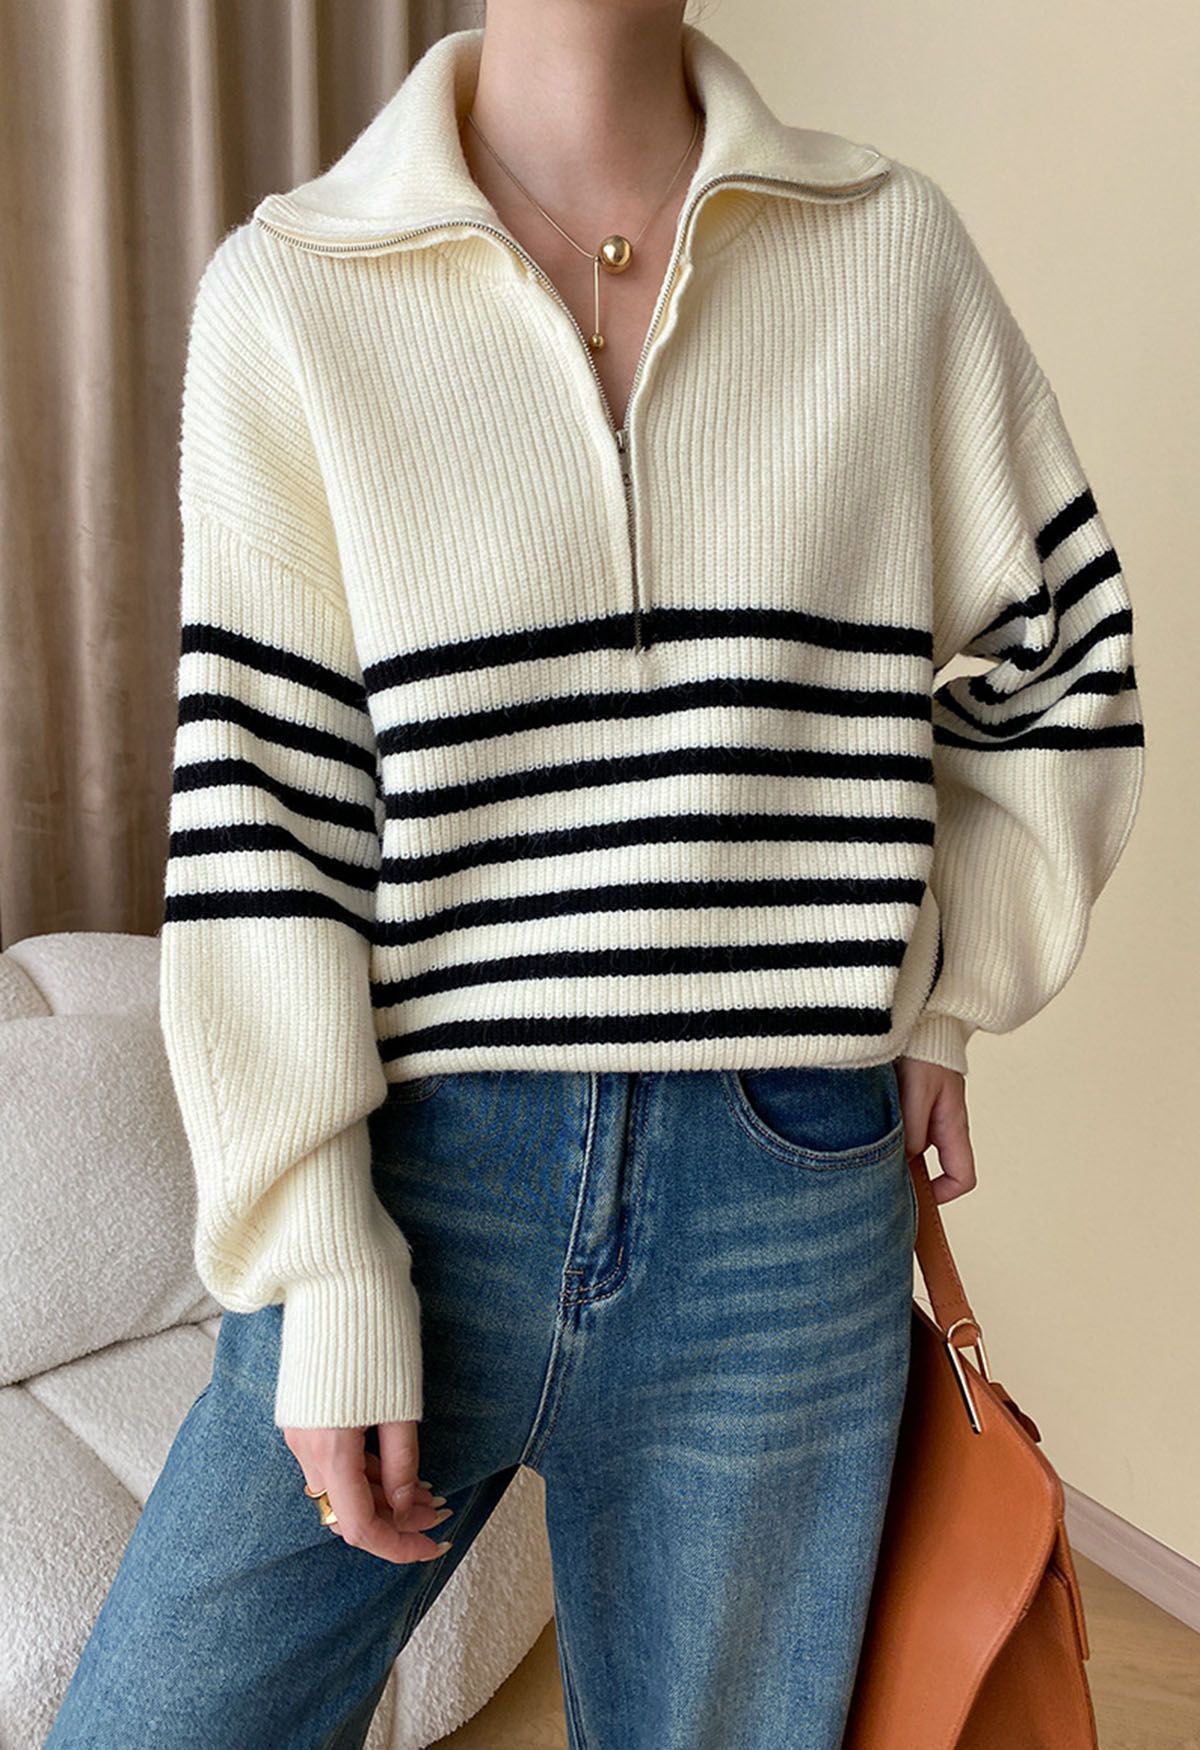 Flap Collar Zipper Neck Striped Knit Sweater in Ivory | Chicwish